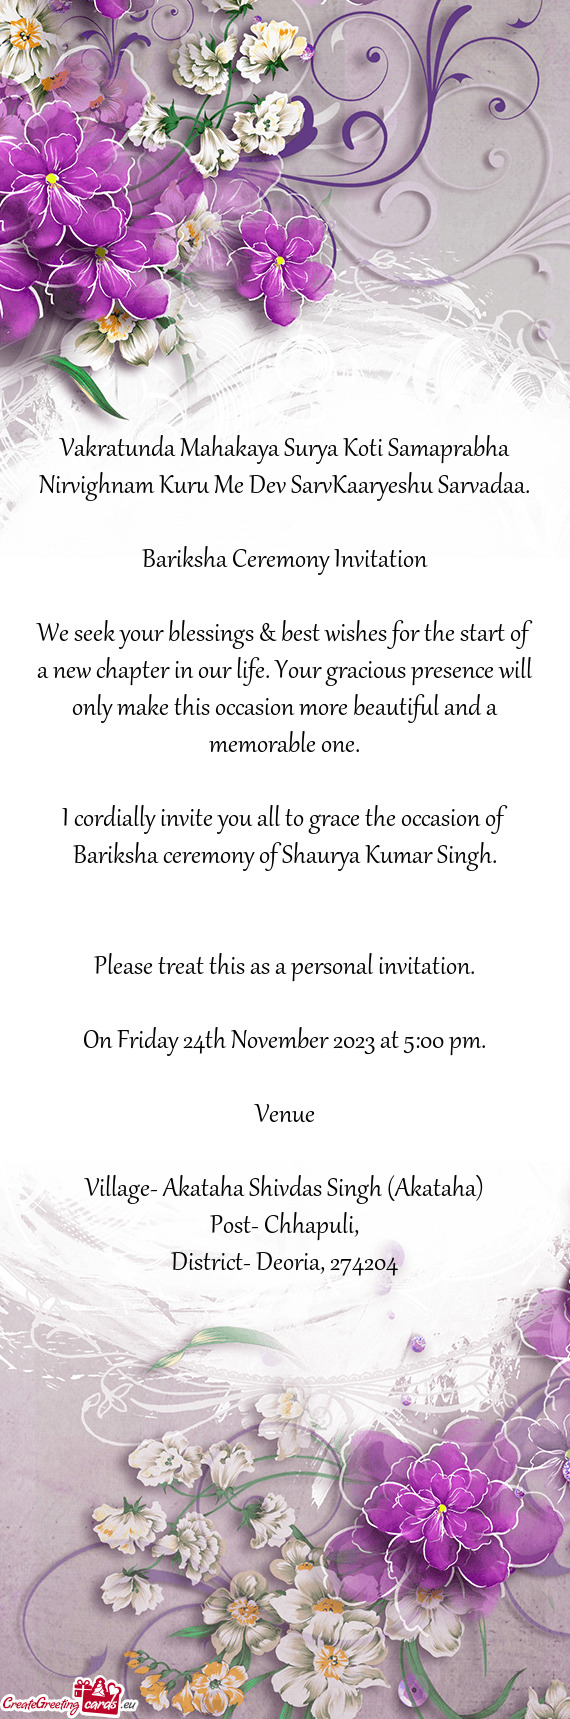 I cordially invite you all to grace the occasion of Bariksha ceremony of Shaurya Kumar Singh